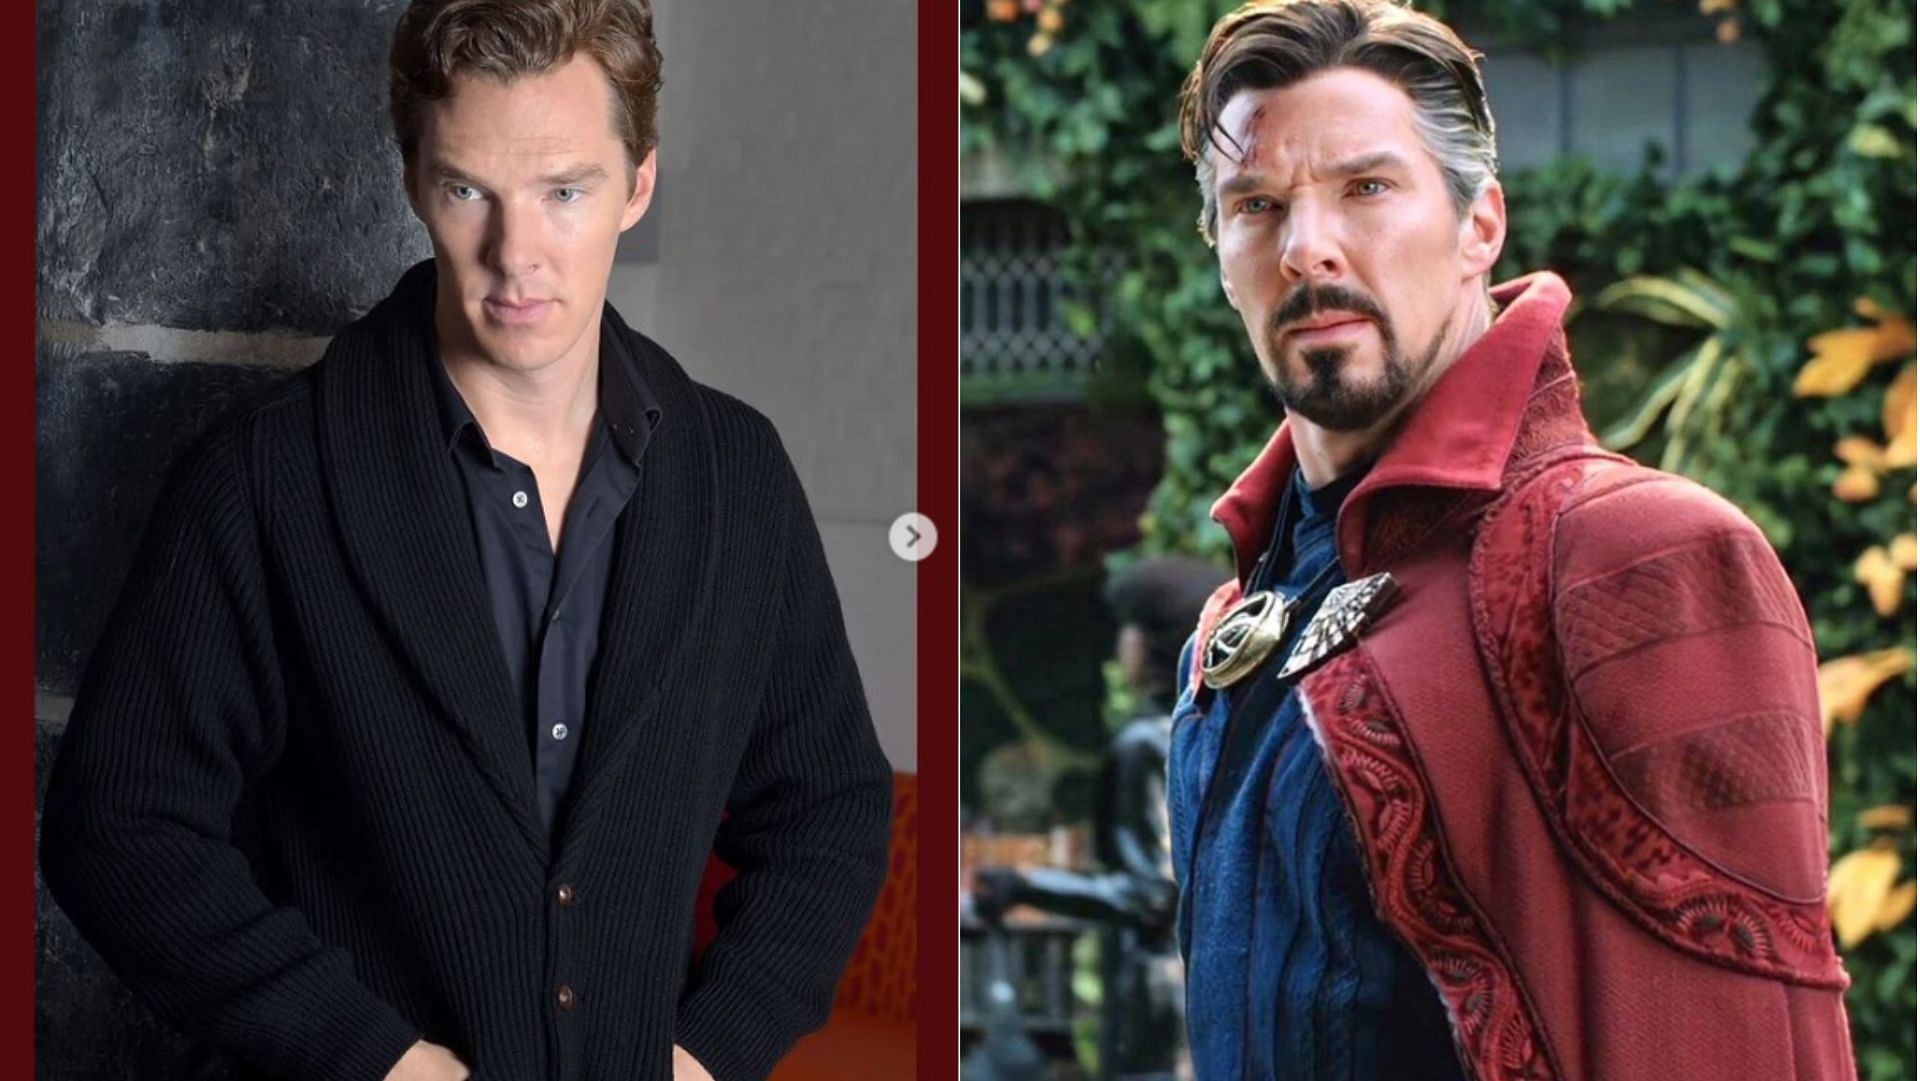 Benedict Cumberbatch diet and workout routine for Dr. Strange. (Image via Instagram)